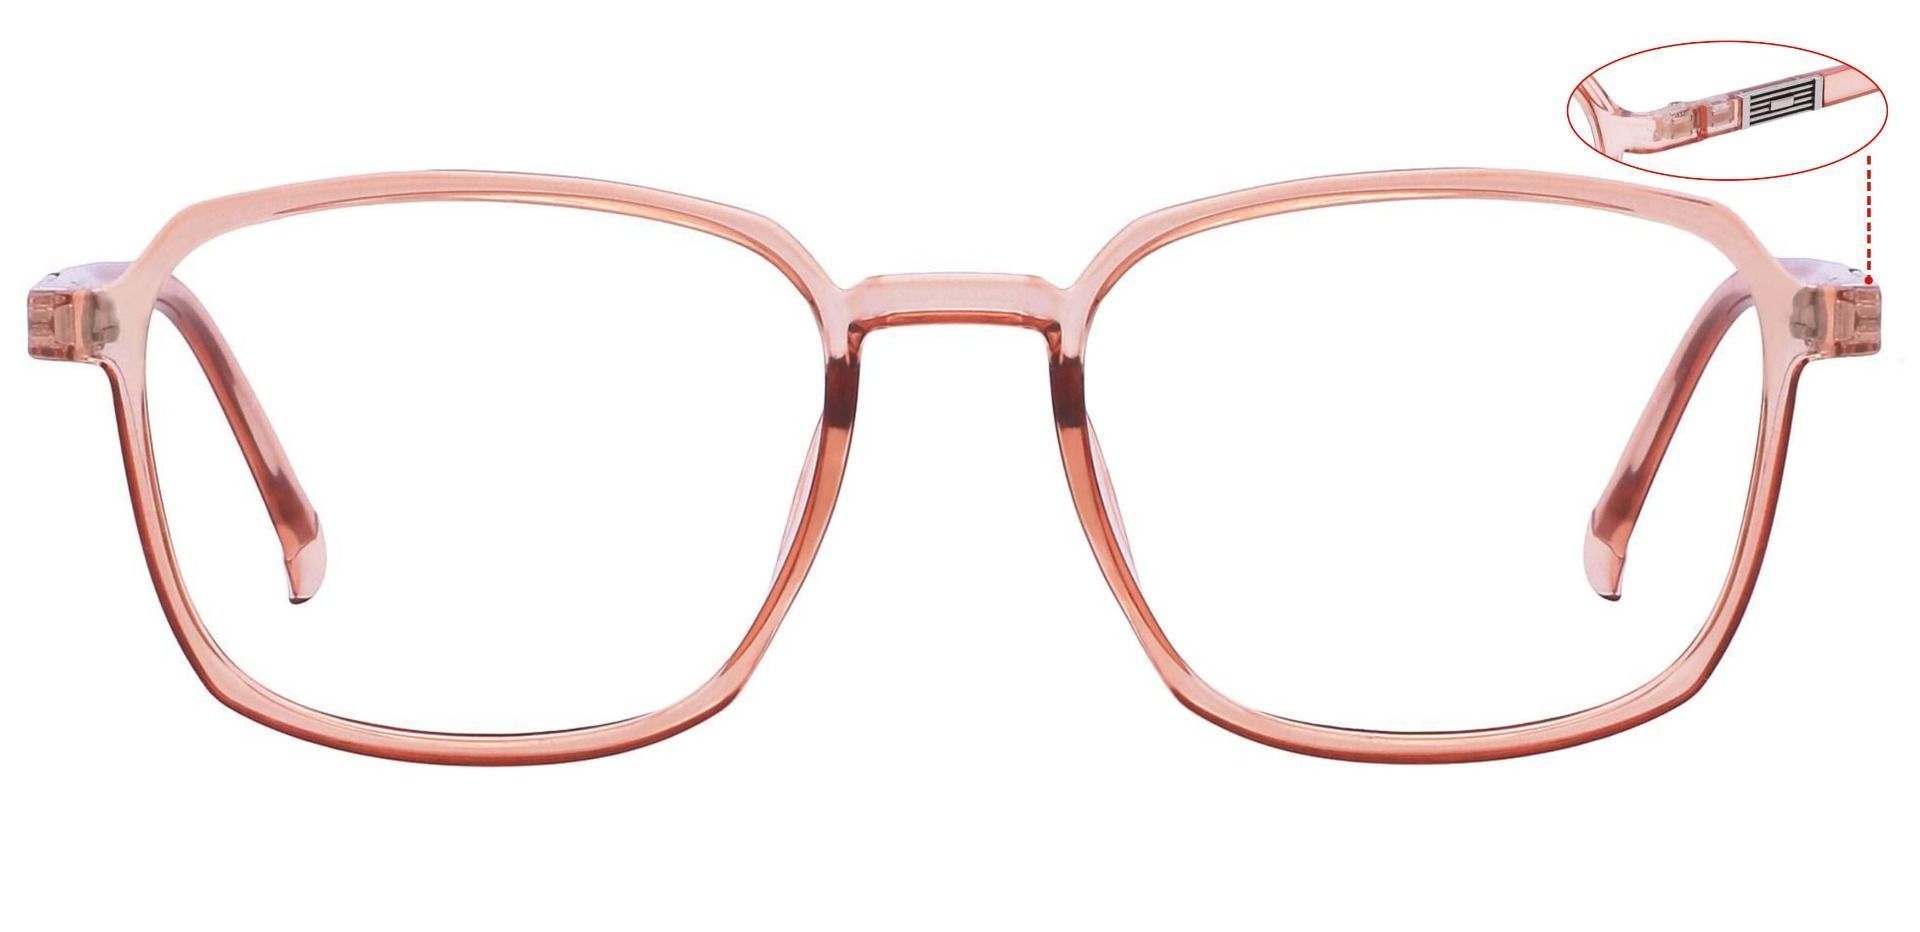 Stella Square Lined Bifocal Glasses - The Frame Is Red And Clear